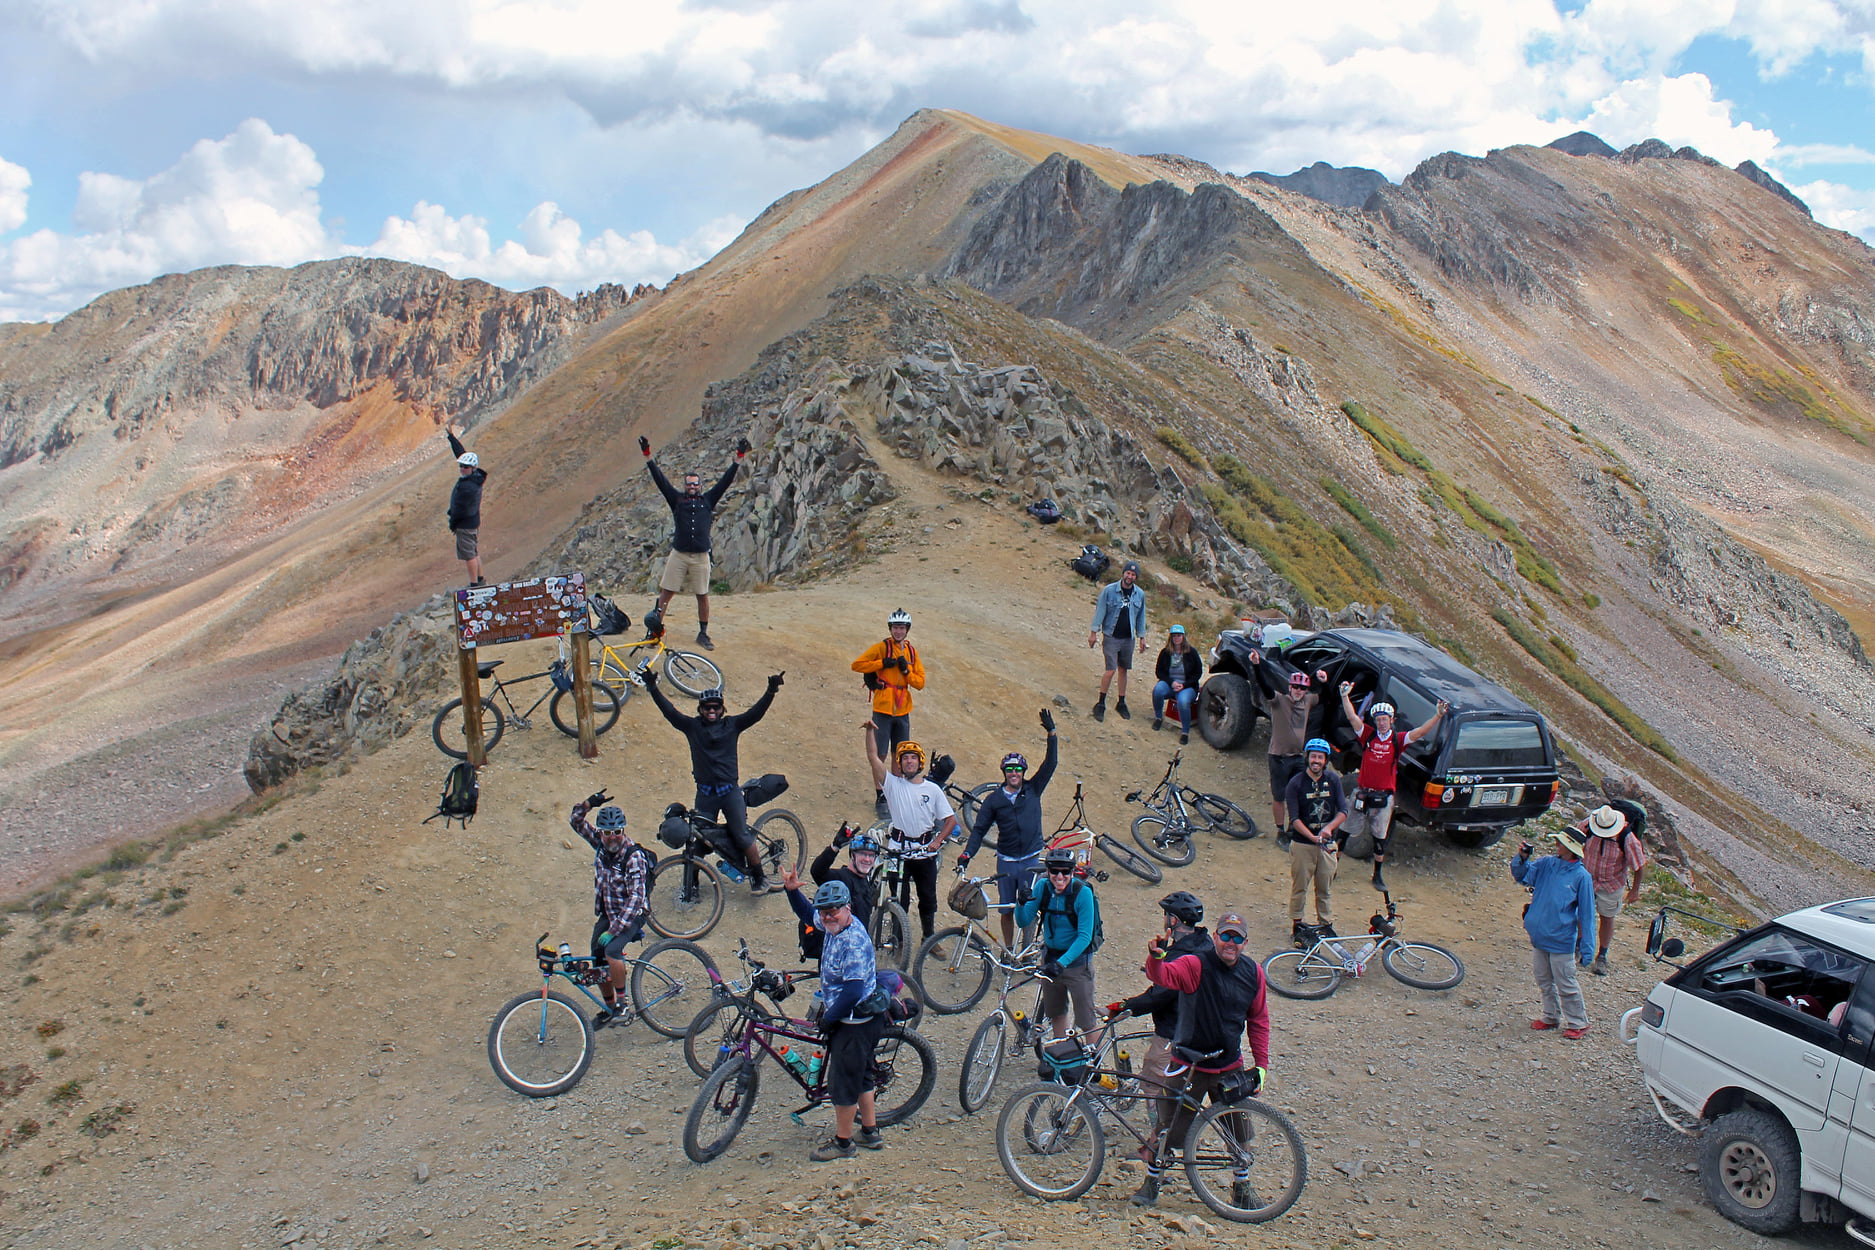 Paerl Pass Tour riders on the summit of Pearl pass on the way to Aspen from Crested Butte. Photo by Rob Korotky